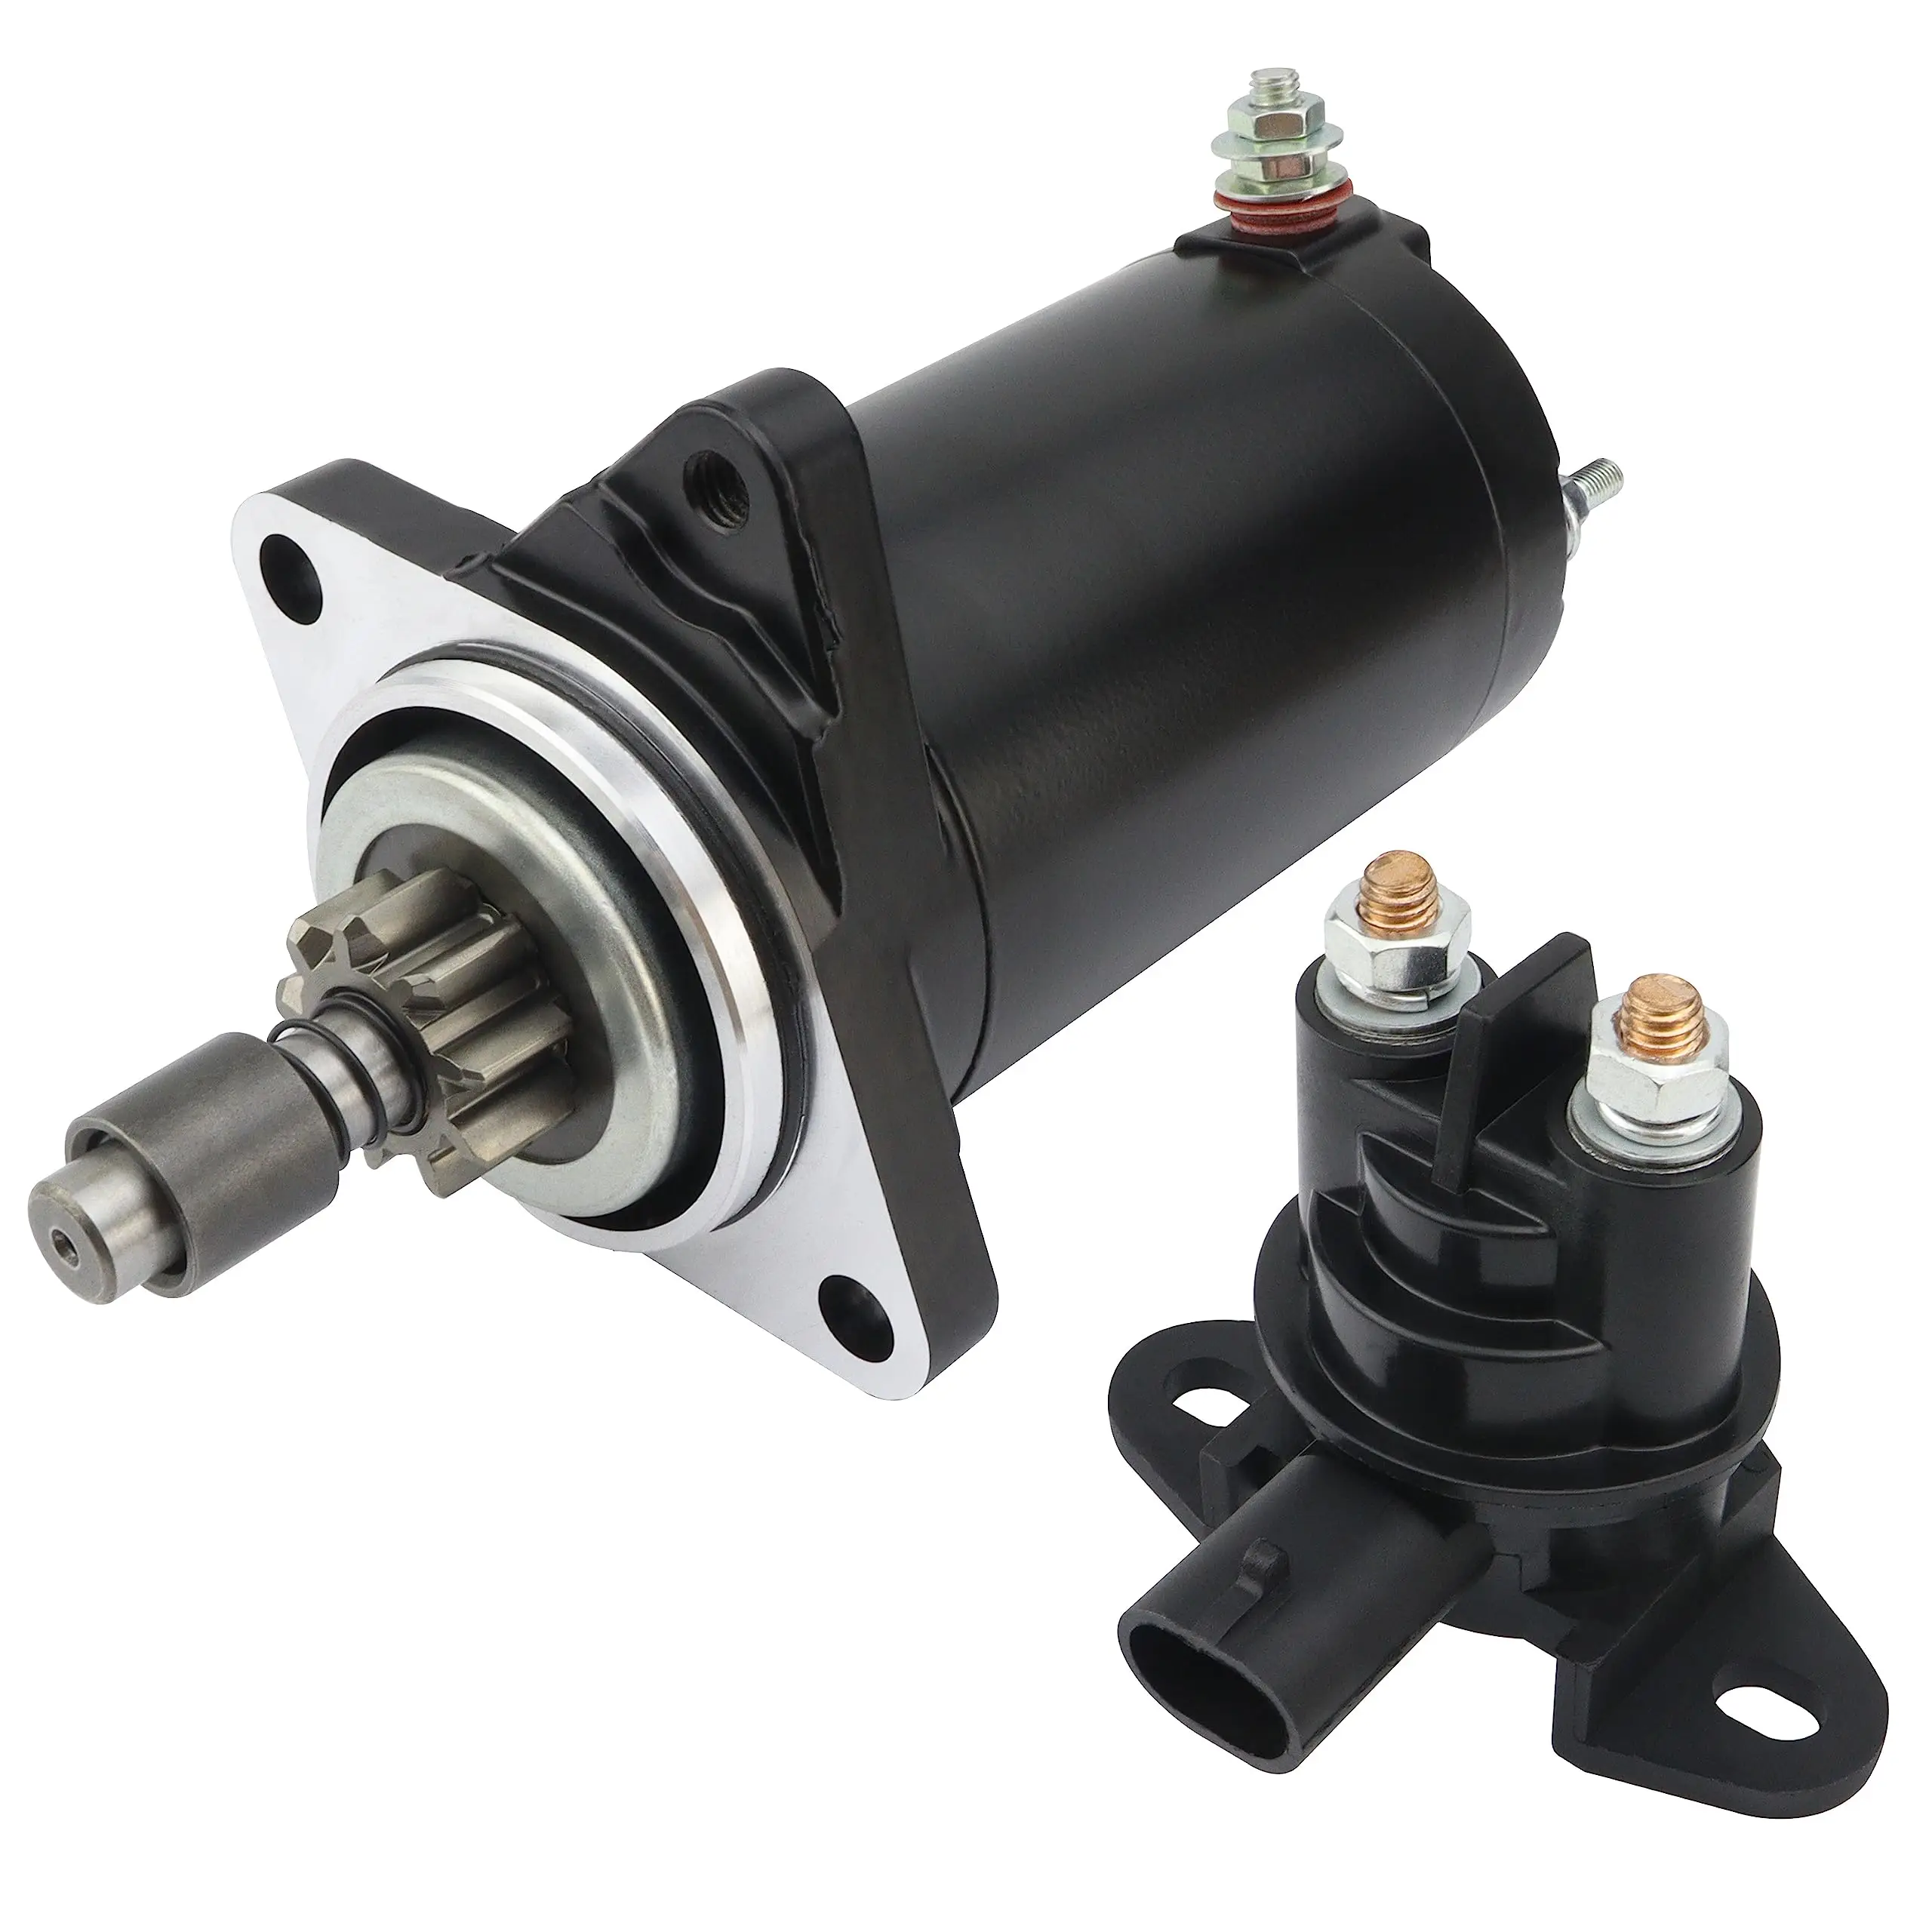 Starter Motor & relay 18415 For SeaDoo SP SPX XP PWC GSI 1997 GTI 718cc 96-05 278-000-484 278-000-485 278-001-300 278-001-935 overload protection relay plastic for mercedes w201 w124 w126 560sl 1984 1997 2015403745 a2015403245 a2015403045 interior parts